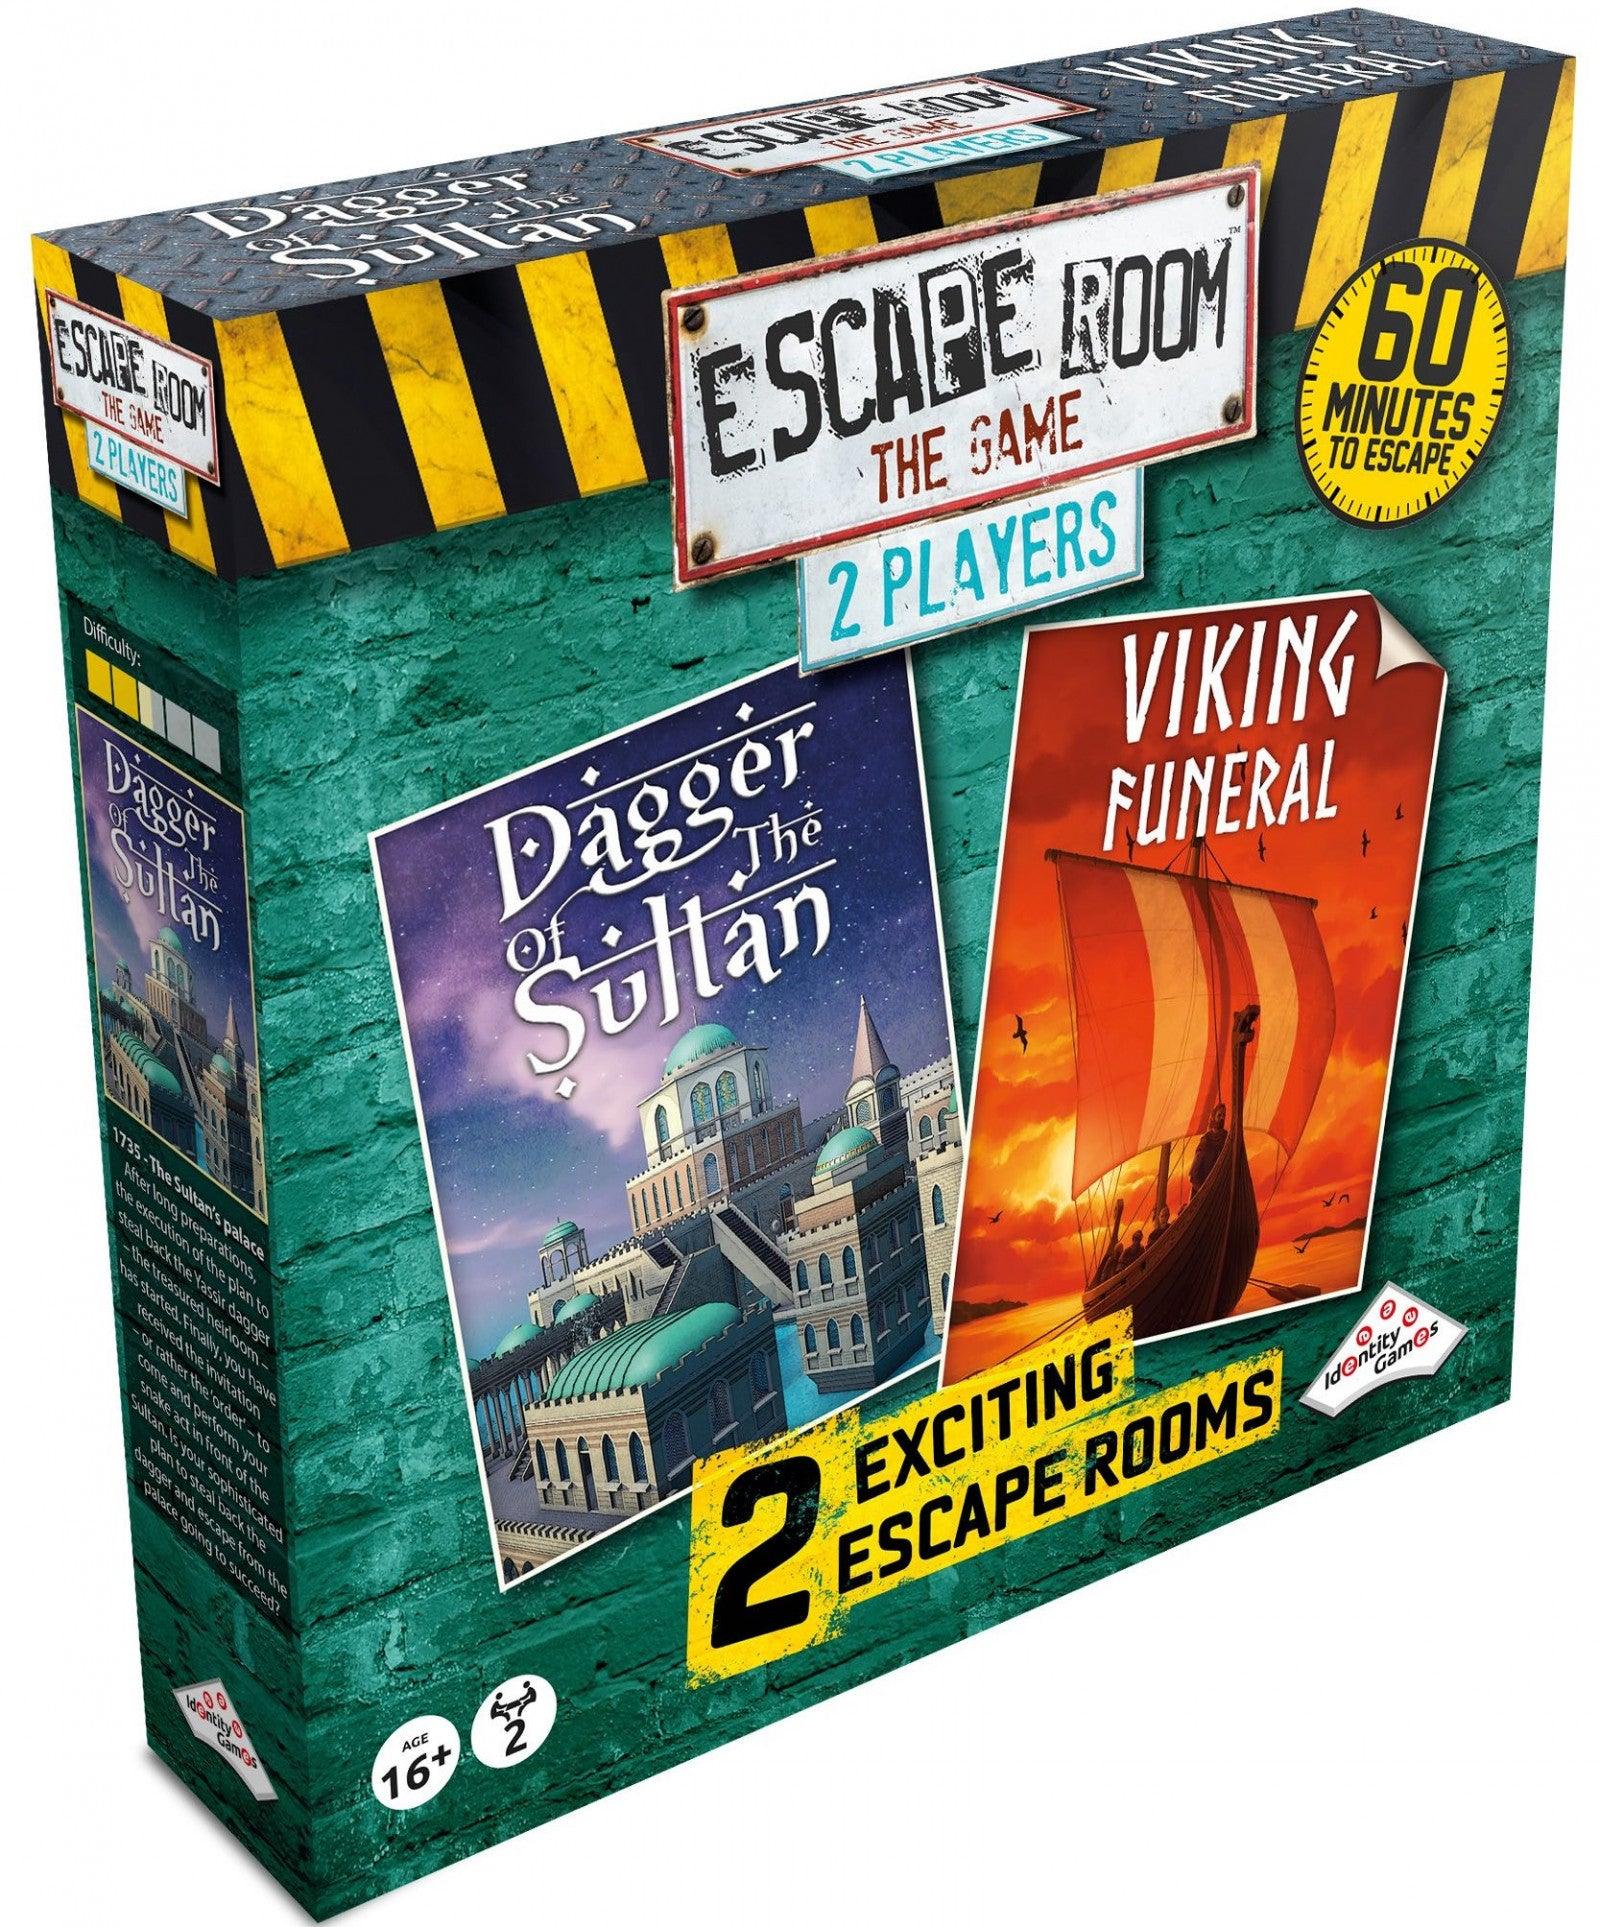 VR-104090 Escape Room The Game 2 Players - Dagger Of The Sultan and Viking Funeral - Identity Games - Titan Pop Culture